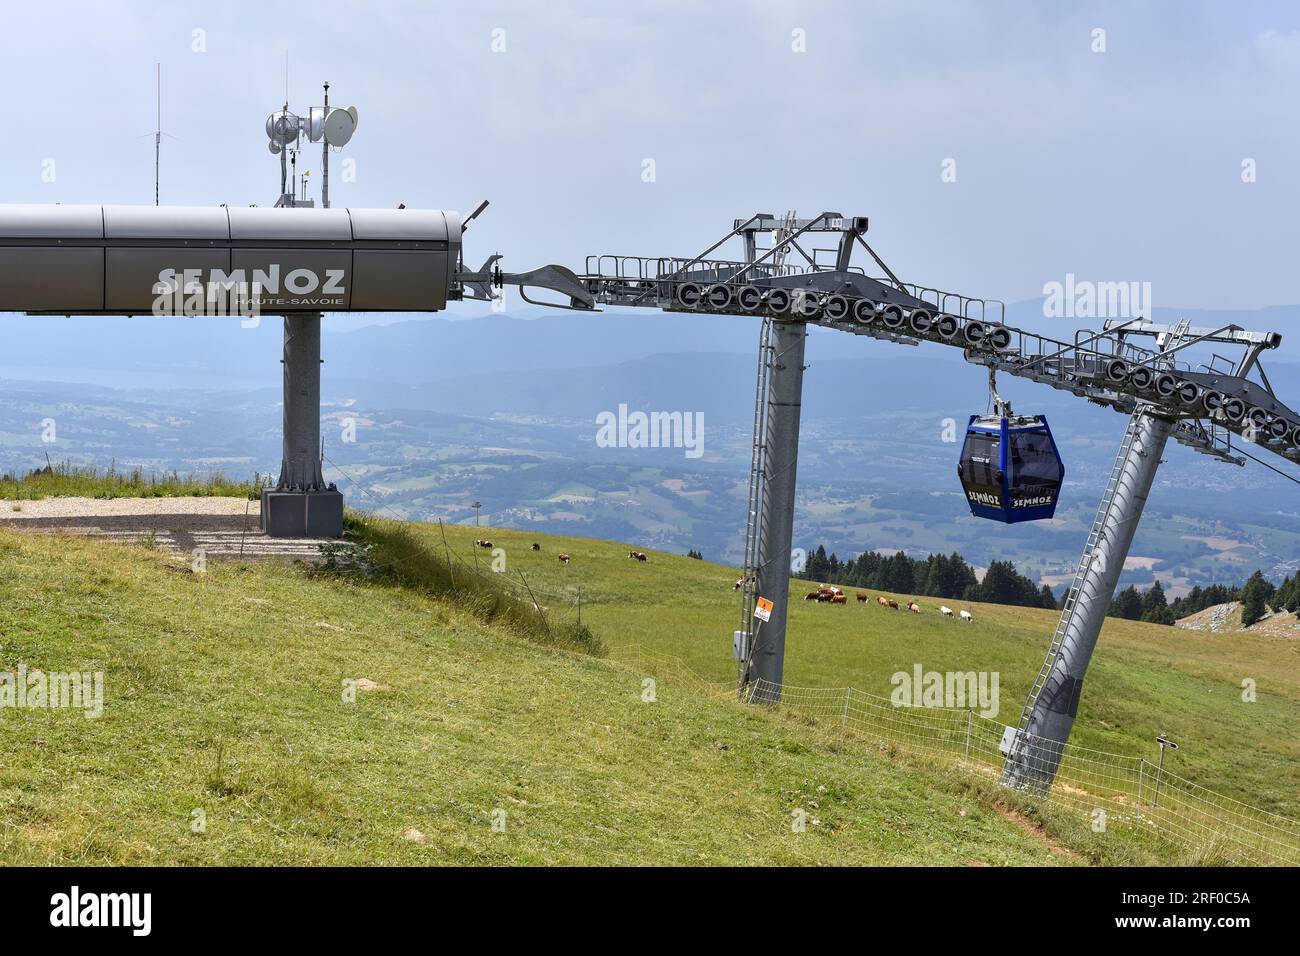 Telemix cable car in the summer, an easy way to reach the top of the Semnoz resort, a mountain in the Haute-Savoie department in France. Stock Photo